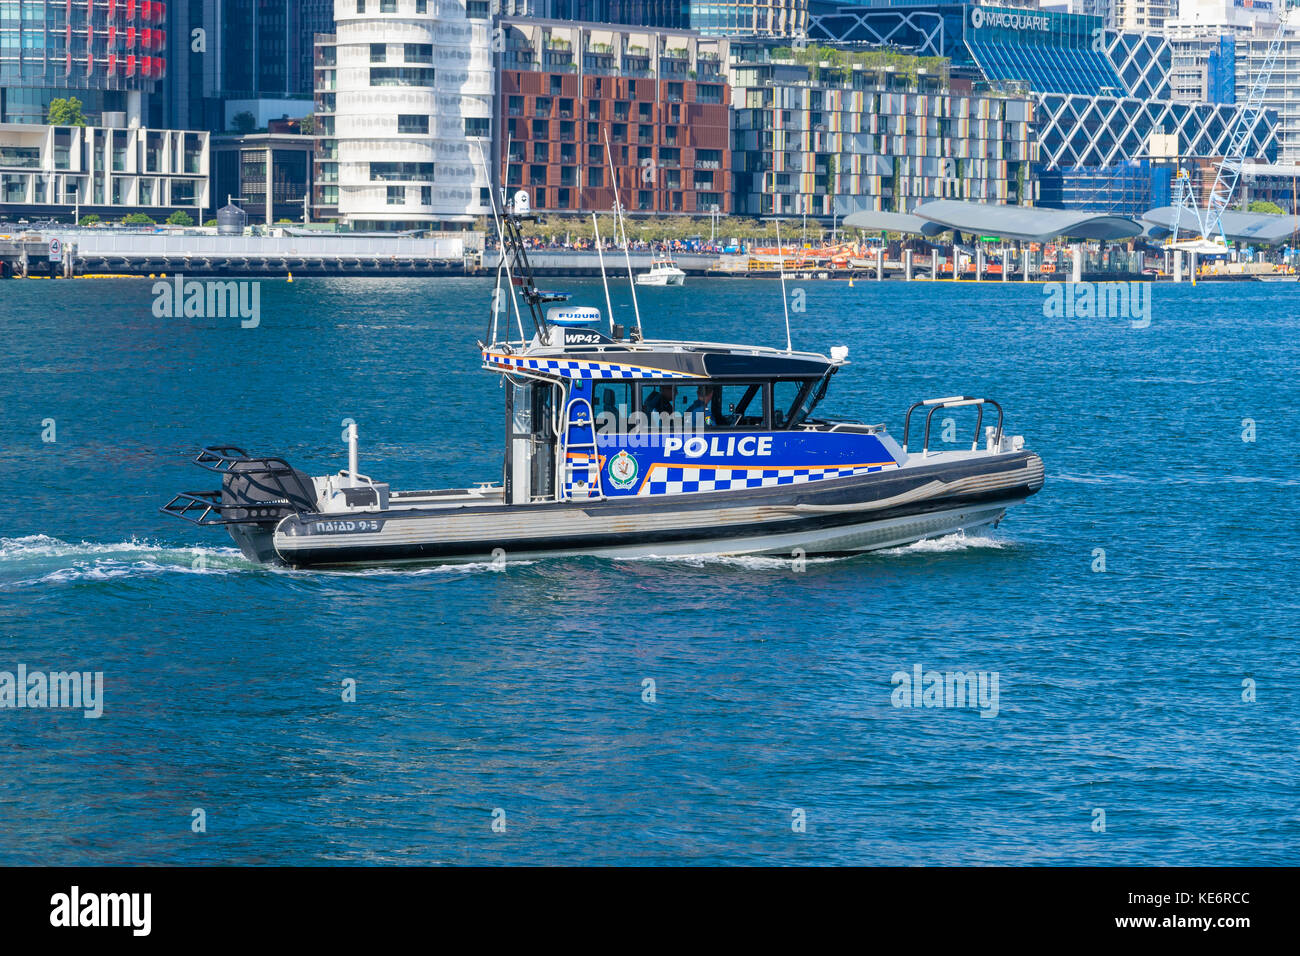 Close-up view of a police boat patrolling in Sydney, Australia Stock Photo